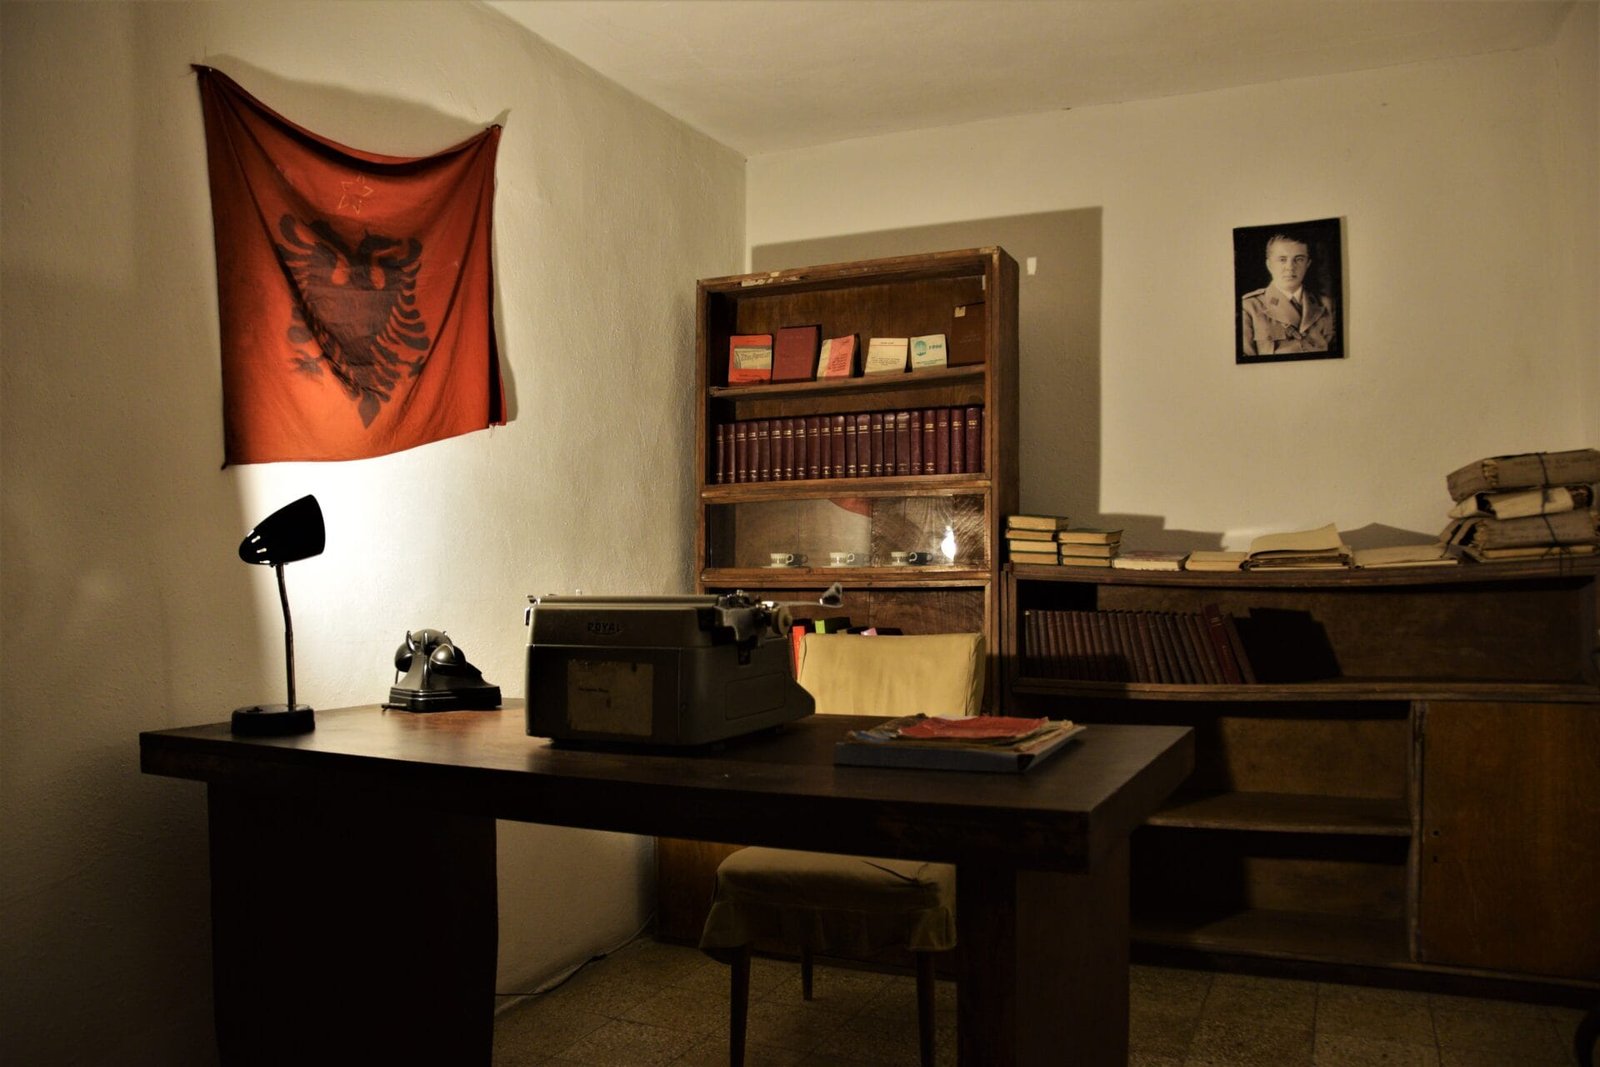 an Albanian flag decorates the wall in a showroom displaying an office from communist times